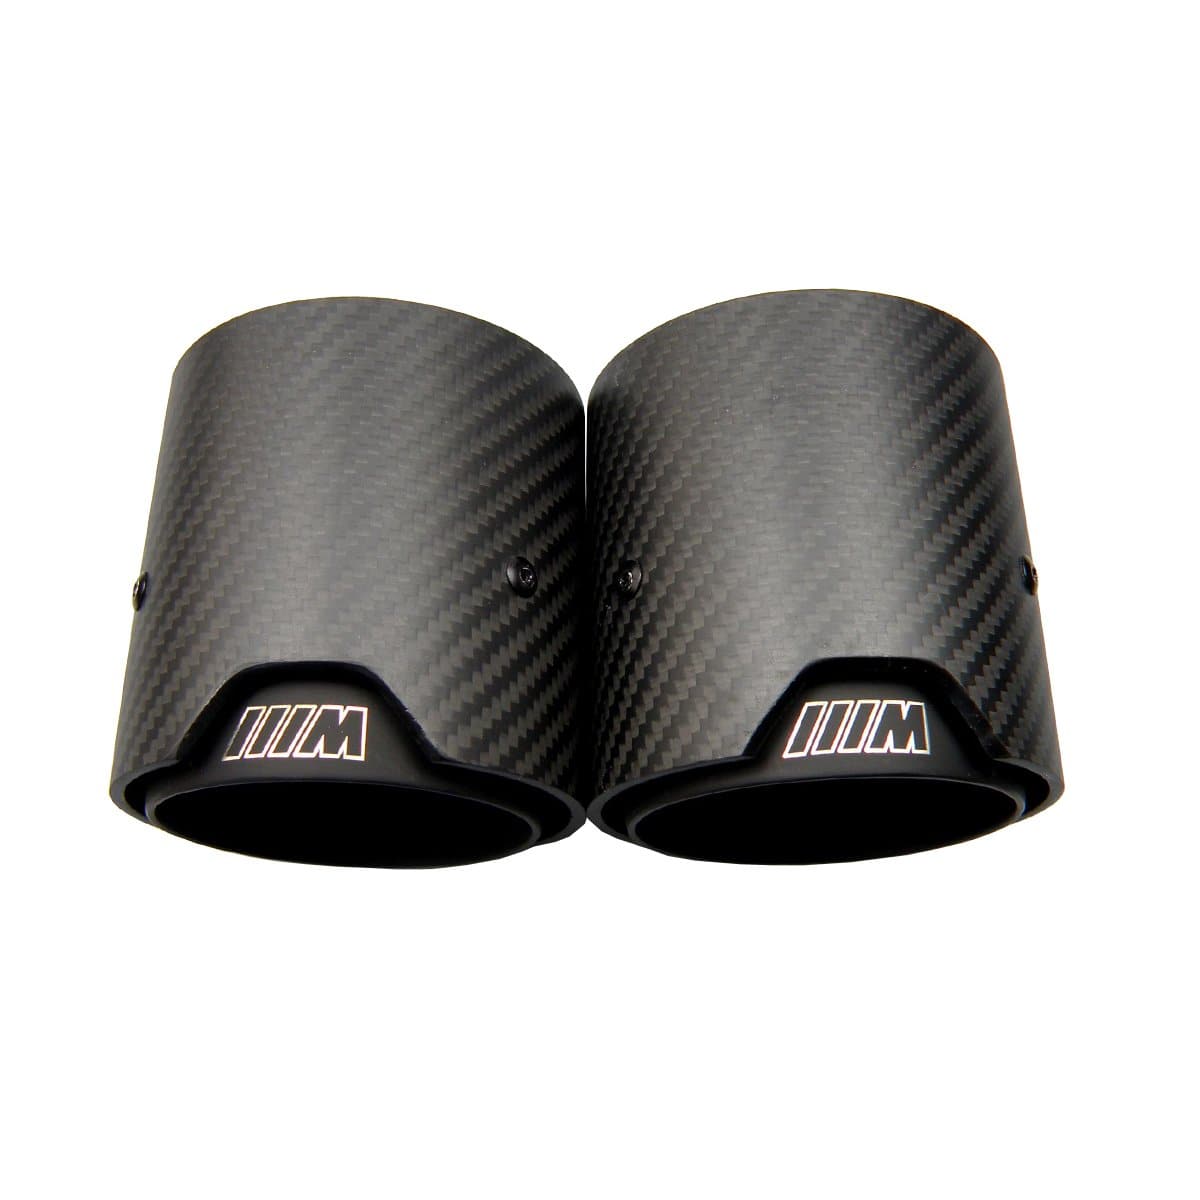 BMW M2/M3/M4/M5/M6 (F87/F80/F82/F83/F10/F06/F12/F13) Black M Performance Carbon Fibre Exhaust Tips - Designed in the M Performance Styling for the M Series BMW Models These exhaust tips are a combination of either a Matt Carbon, or Gloss Carbon Shell finished with High-Temperature Gloss Black Paint Finish with a laser-etched M Logo creating a stunning finish to all M Series BMW Models. 